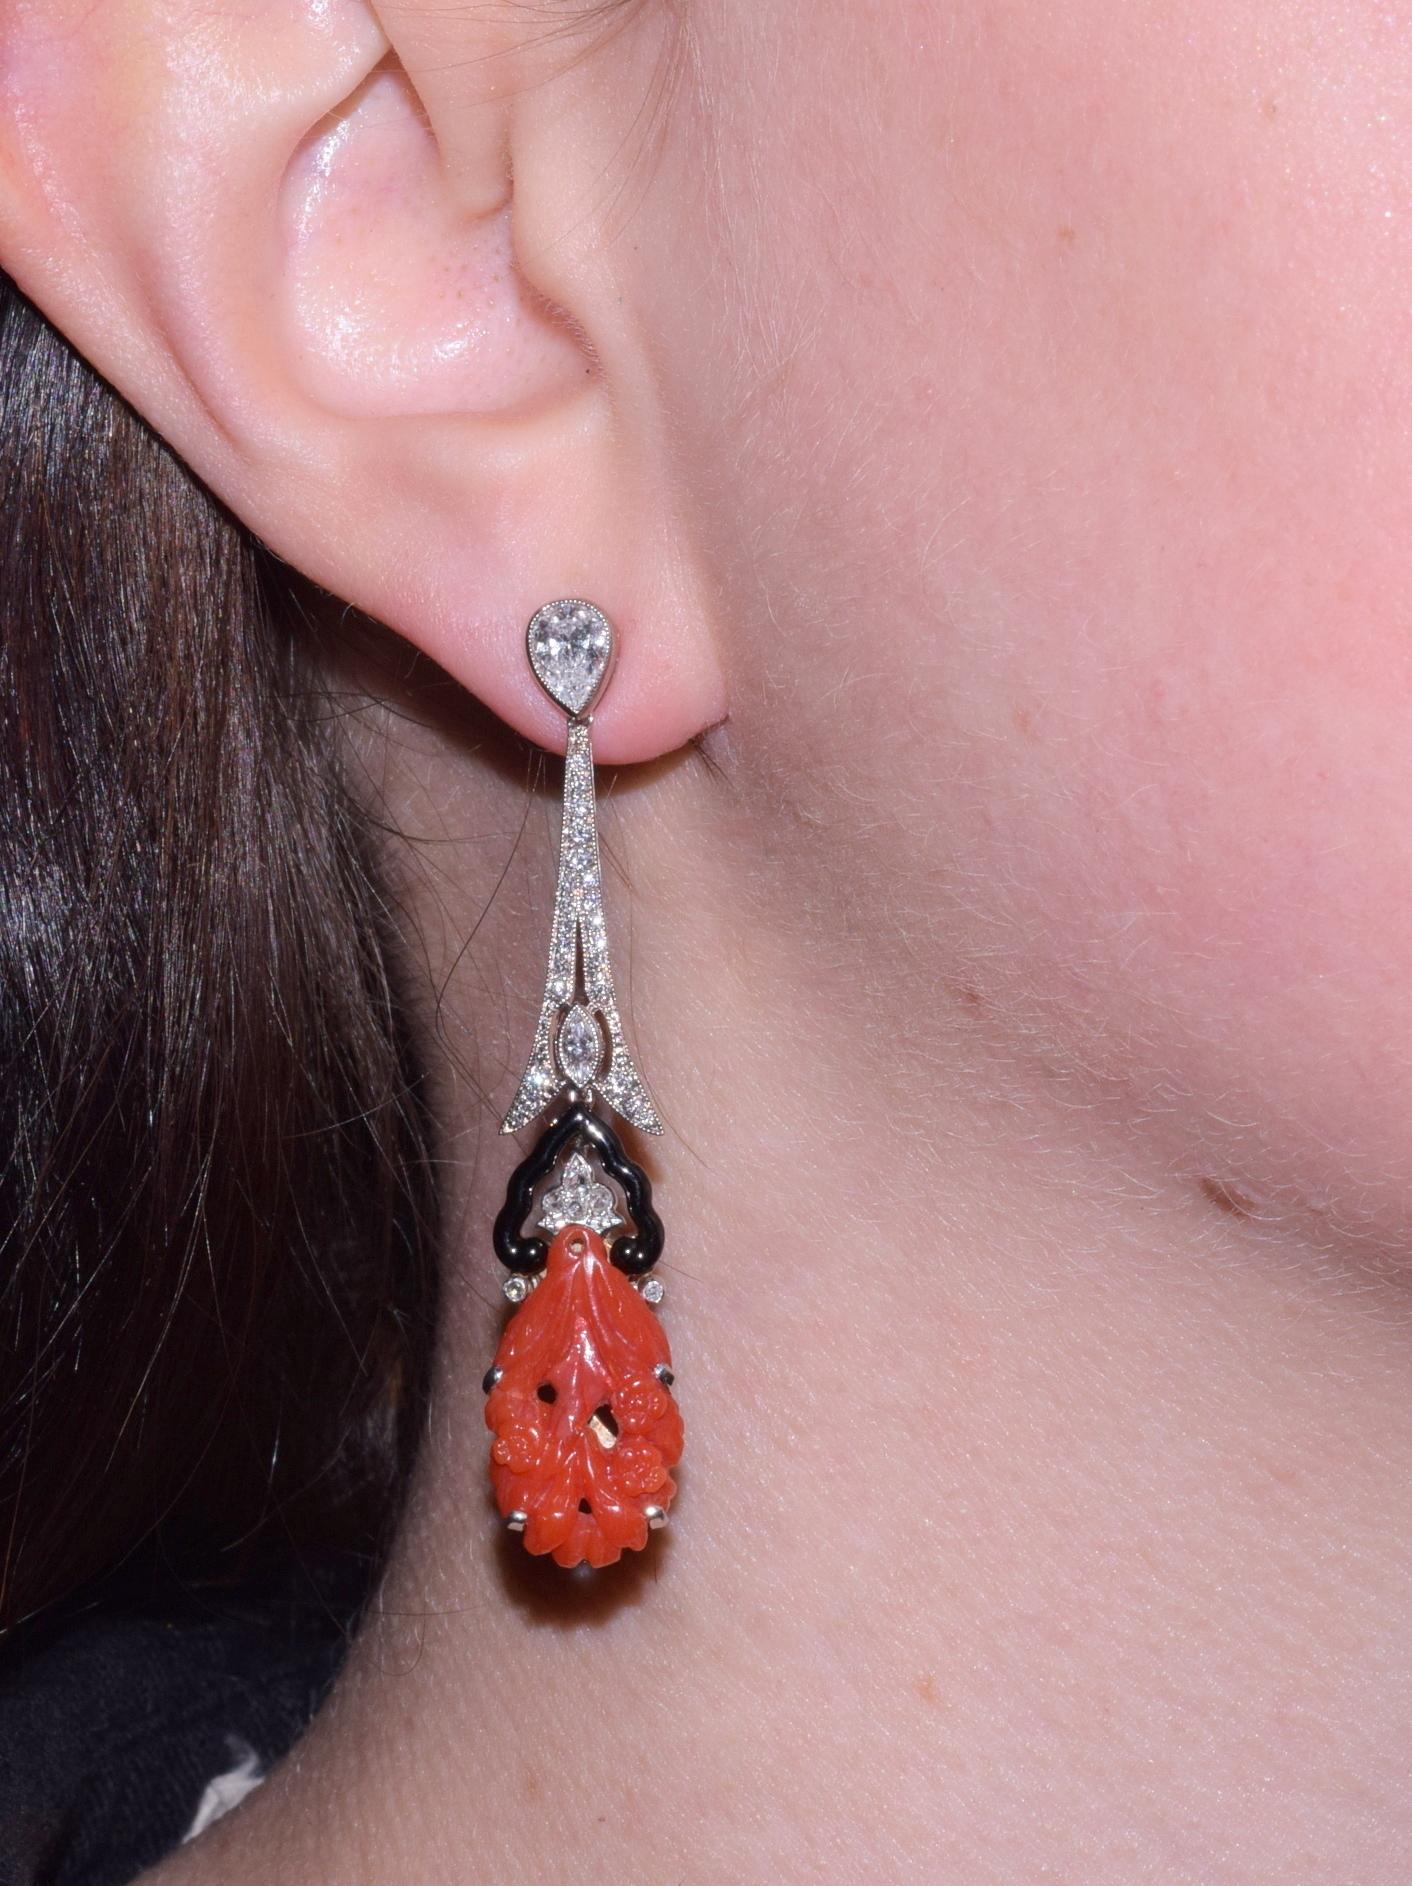 Art Deco carved coral plaques mounted with black enamel and diamonds, originally  elements of a brooch, have been reimagined by Fred Leighton as earrings suspended from decorative tops composed of pear shape, marquise and round diamonds totaling